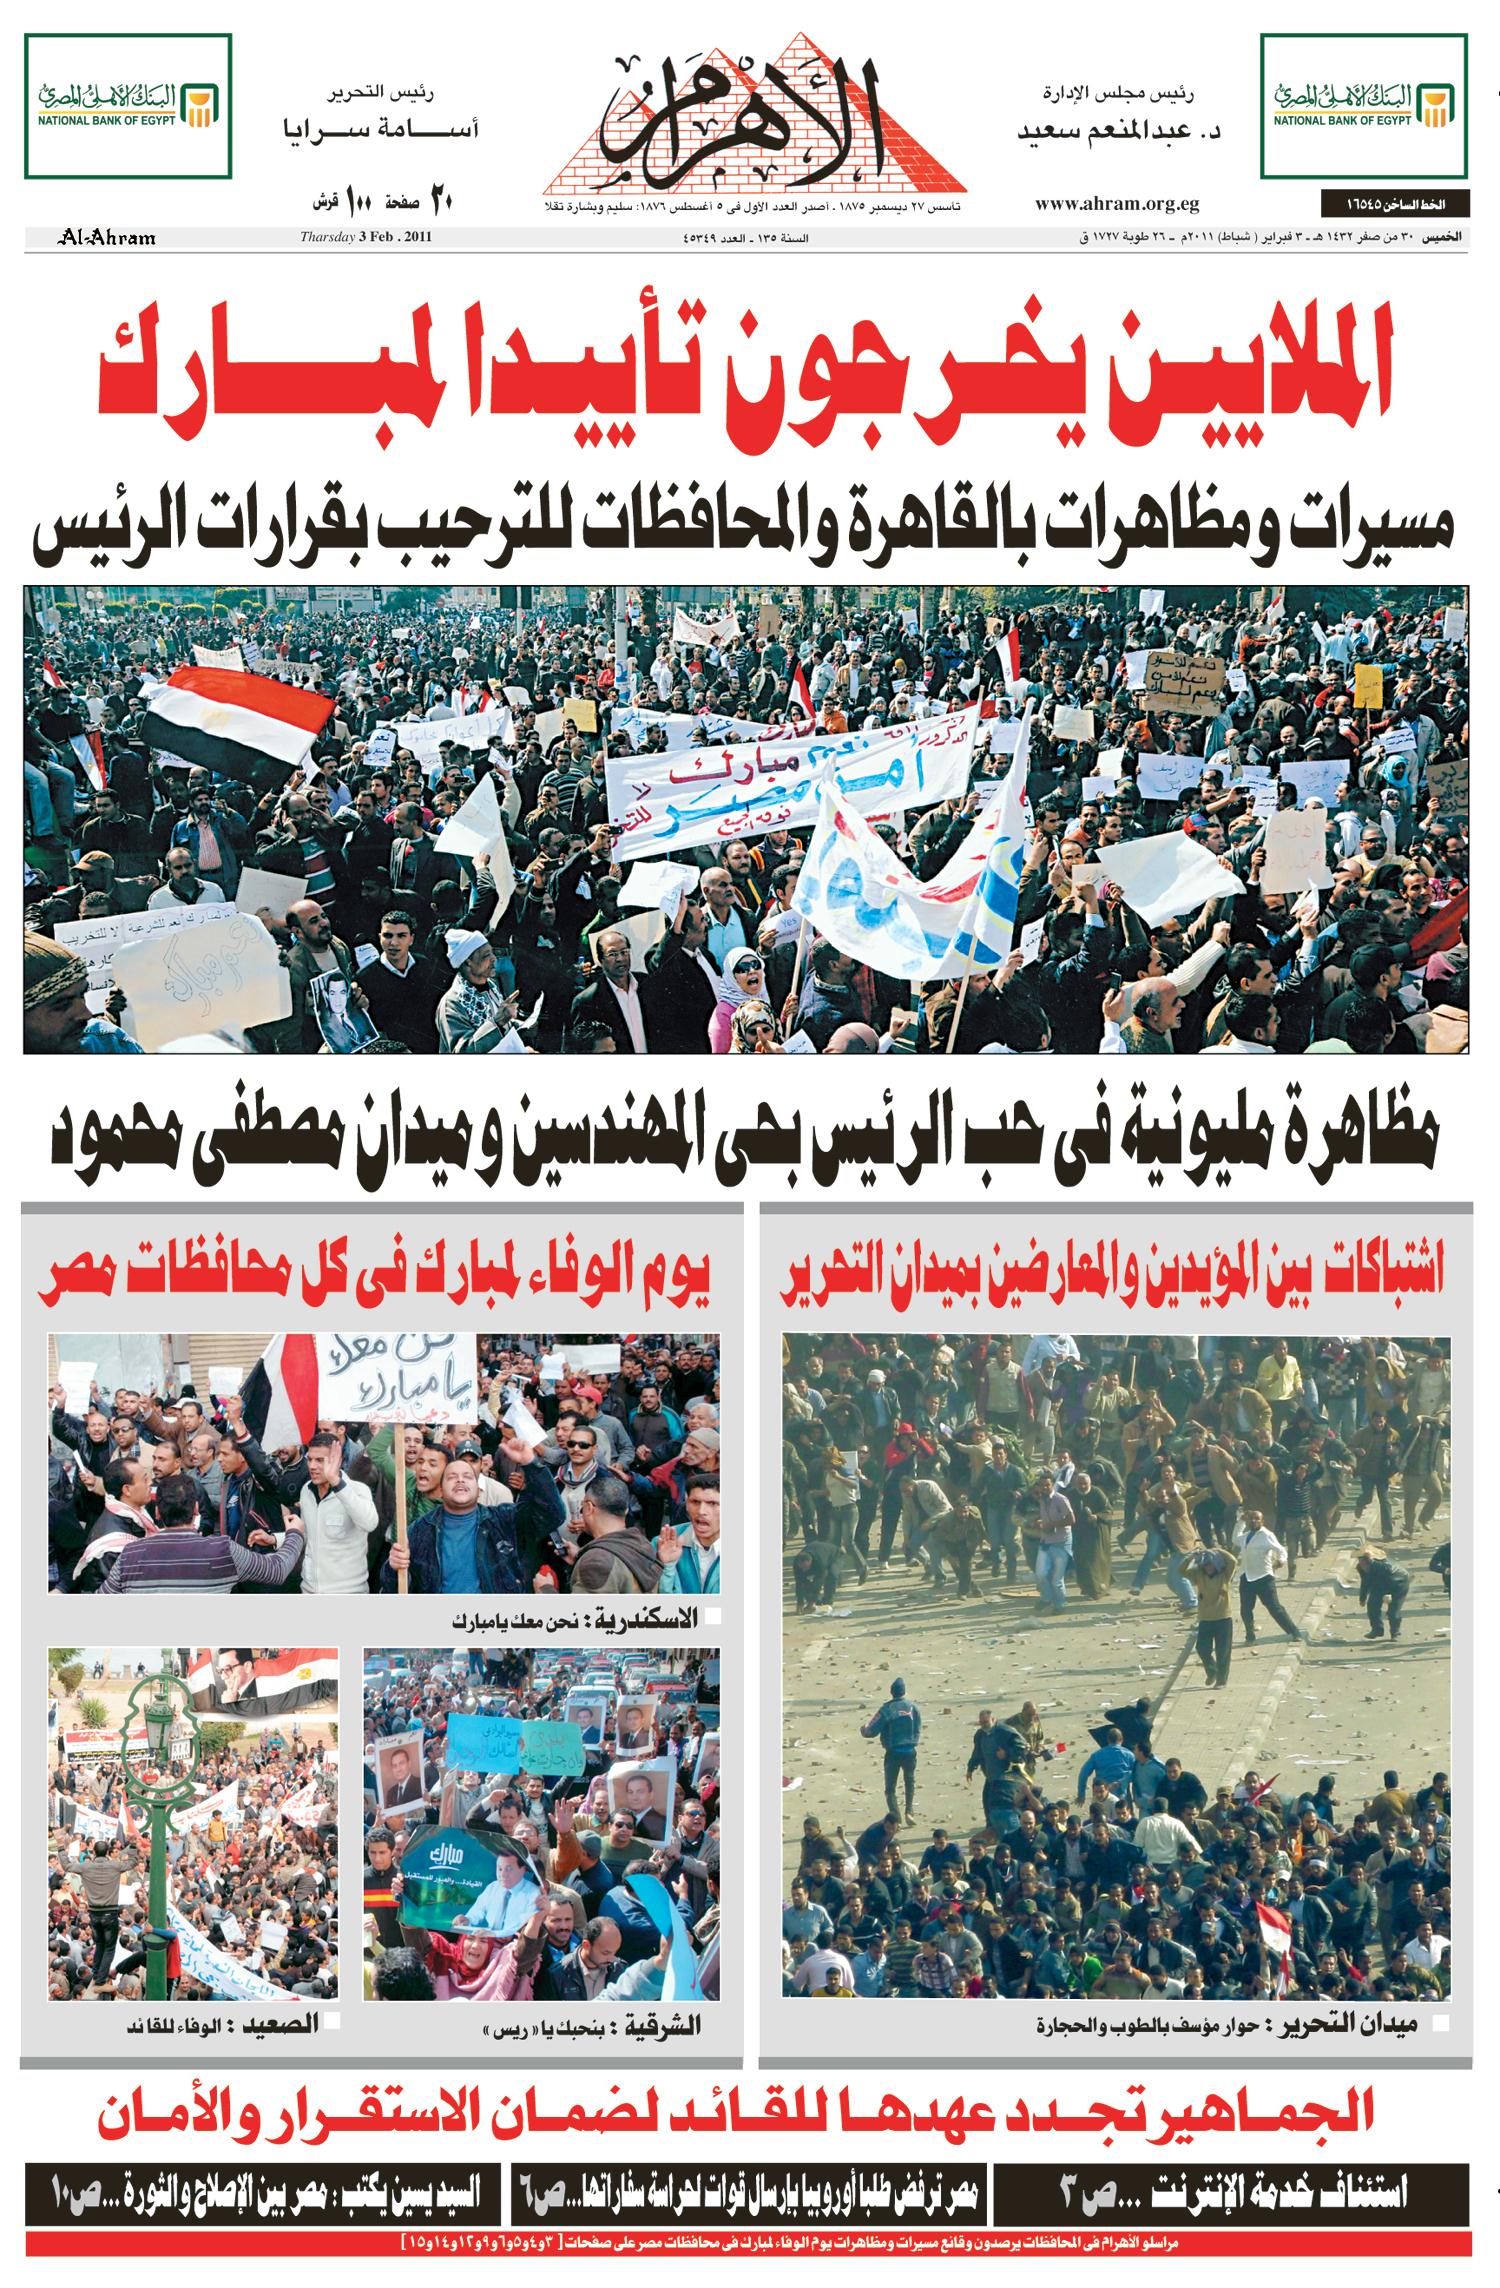 Flooding support of Egyptian prople for President Mubarak as reported on the front page of the Egyptian daily Al-Ahram, February 3, 2011.